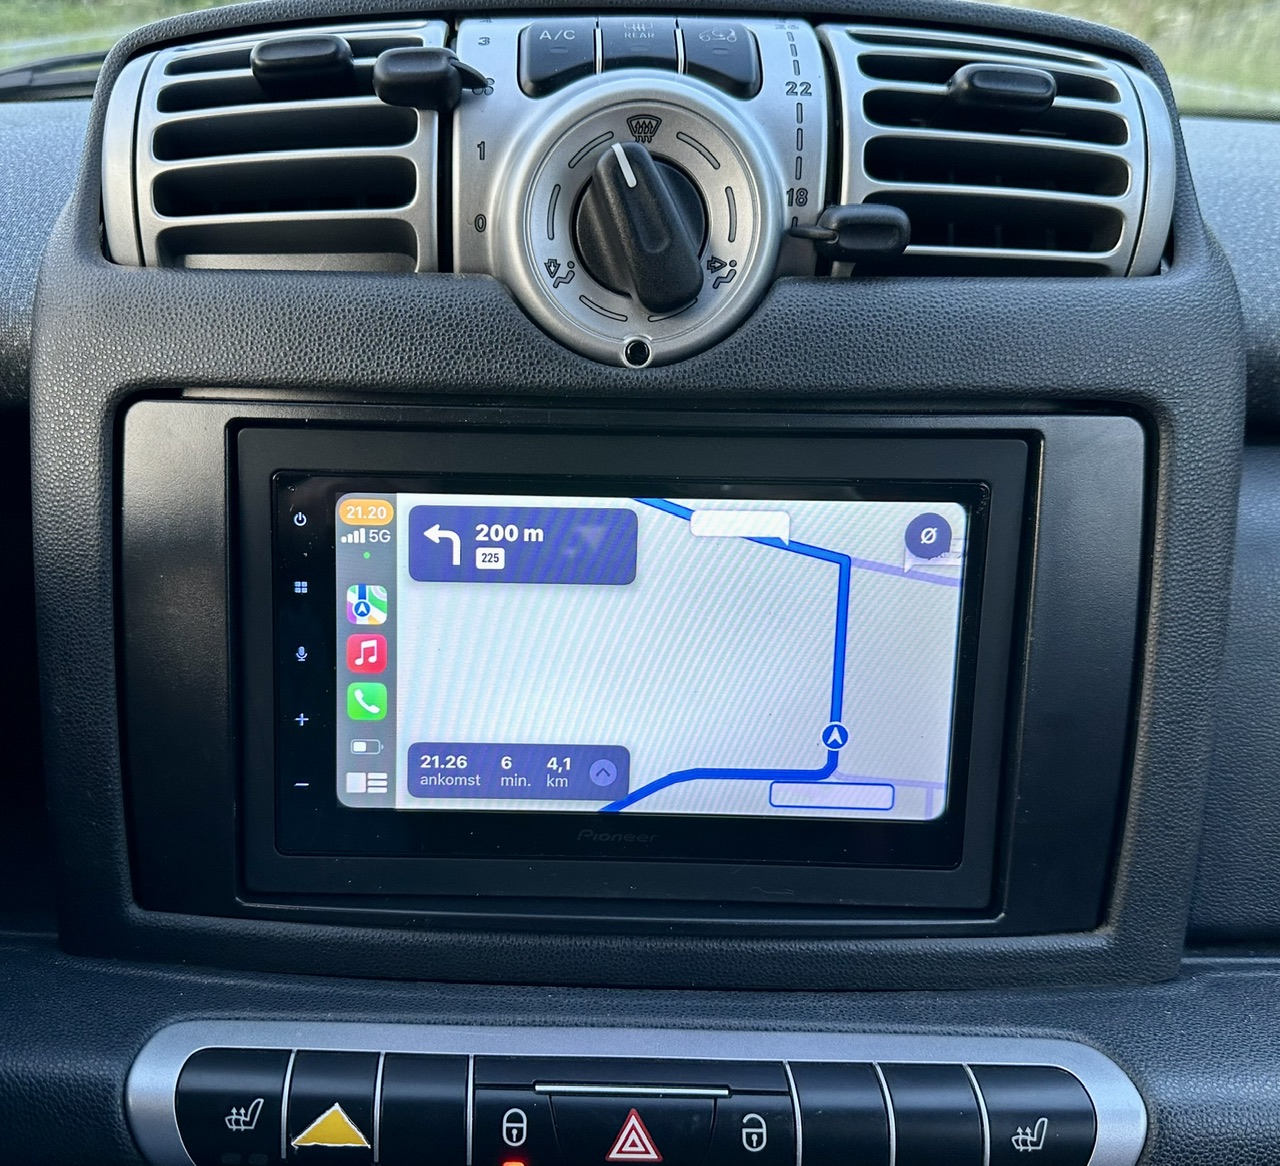 Upgrading the fortwo's radio to a 2-DIN CarPlay unit - Stories from behind  the wheel of a Smart Fortwo Cabrio